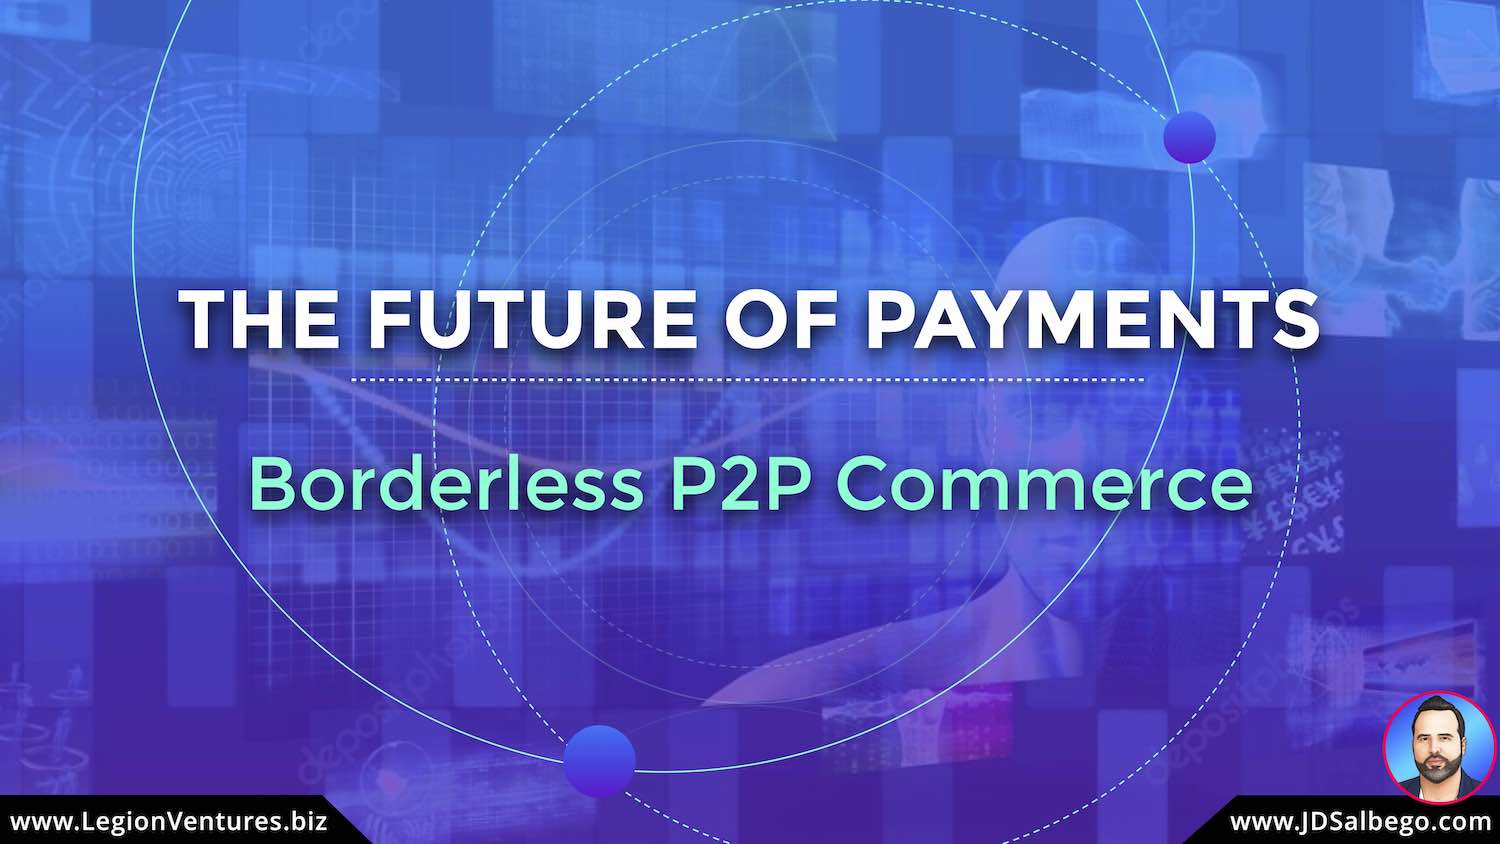 Blockchain Innovation - The Future of Payments and Borderless P2P Commerce